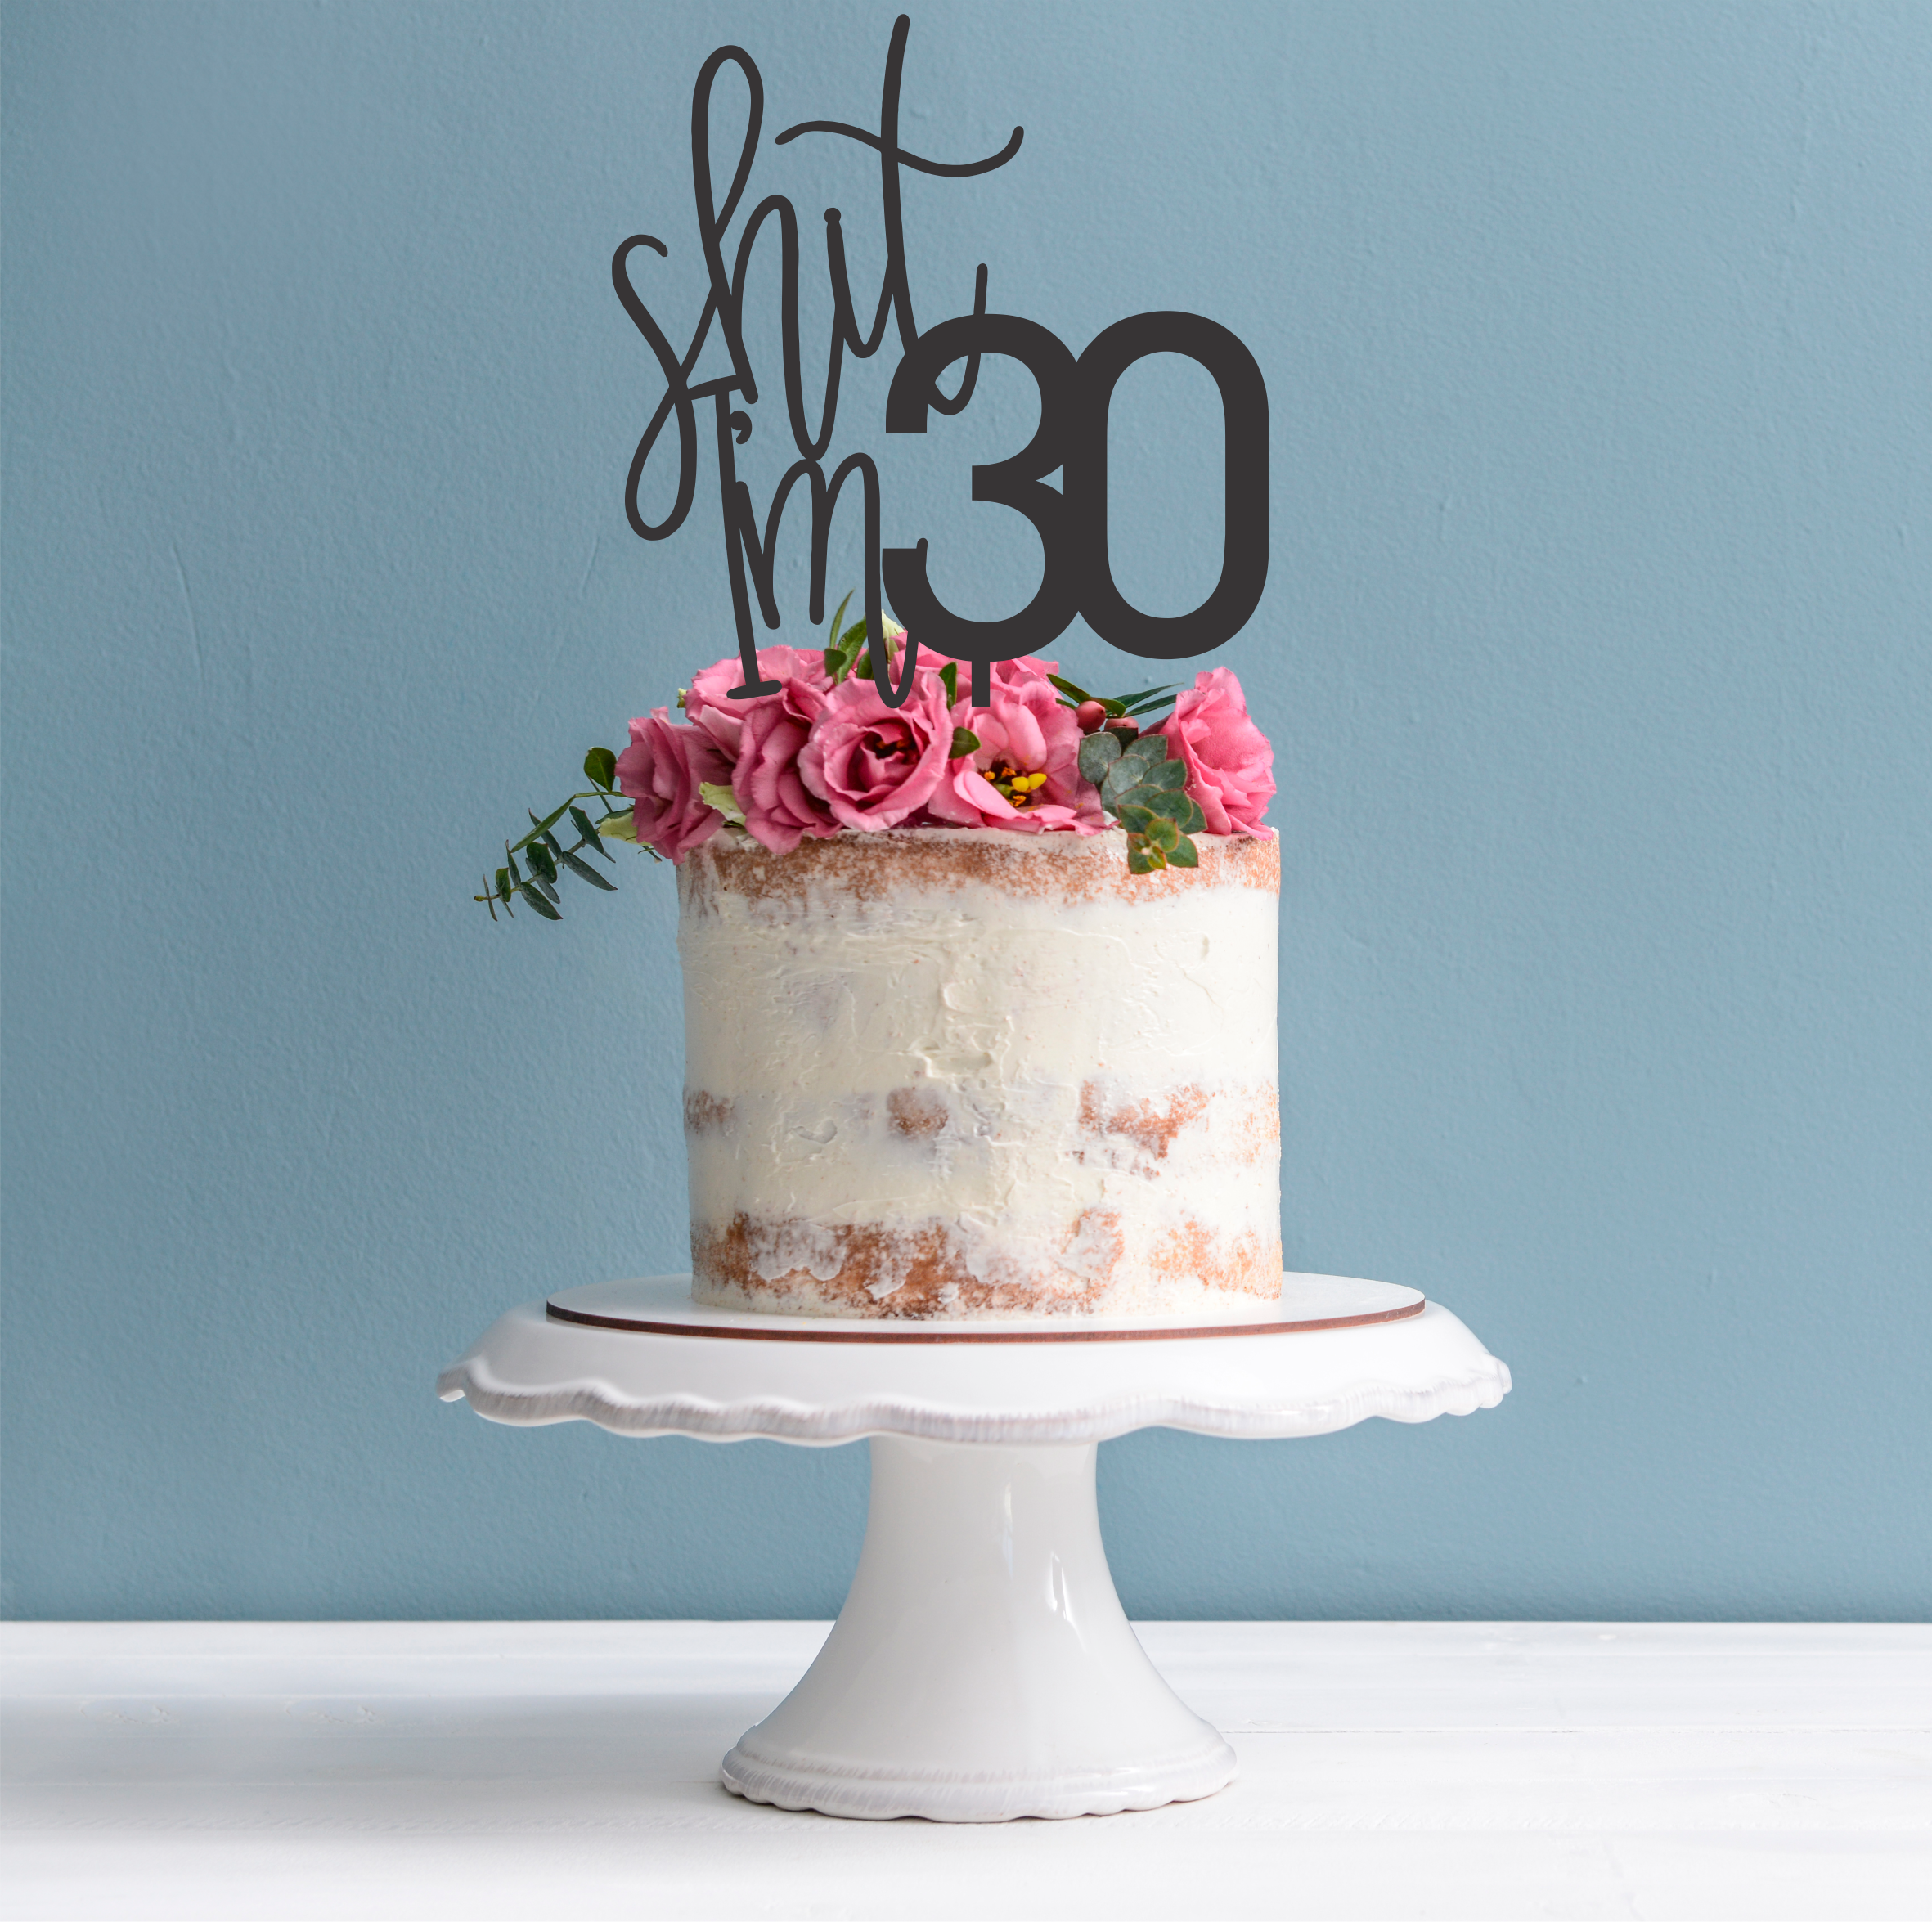 Ultimate List of 30th Birthday Cake Ideas - Attention Trust